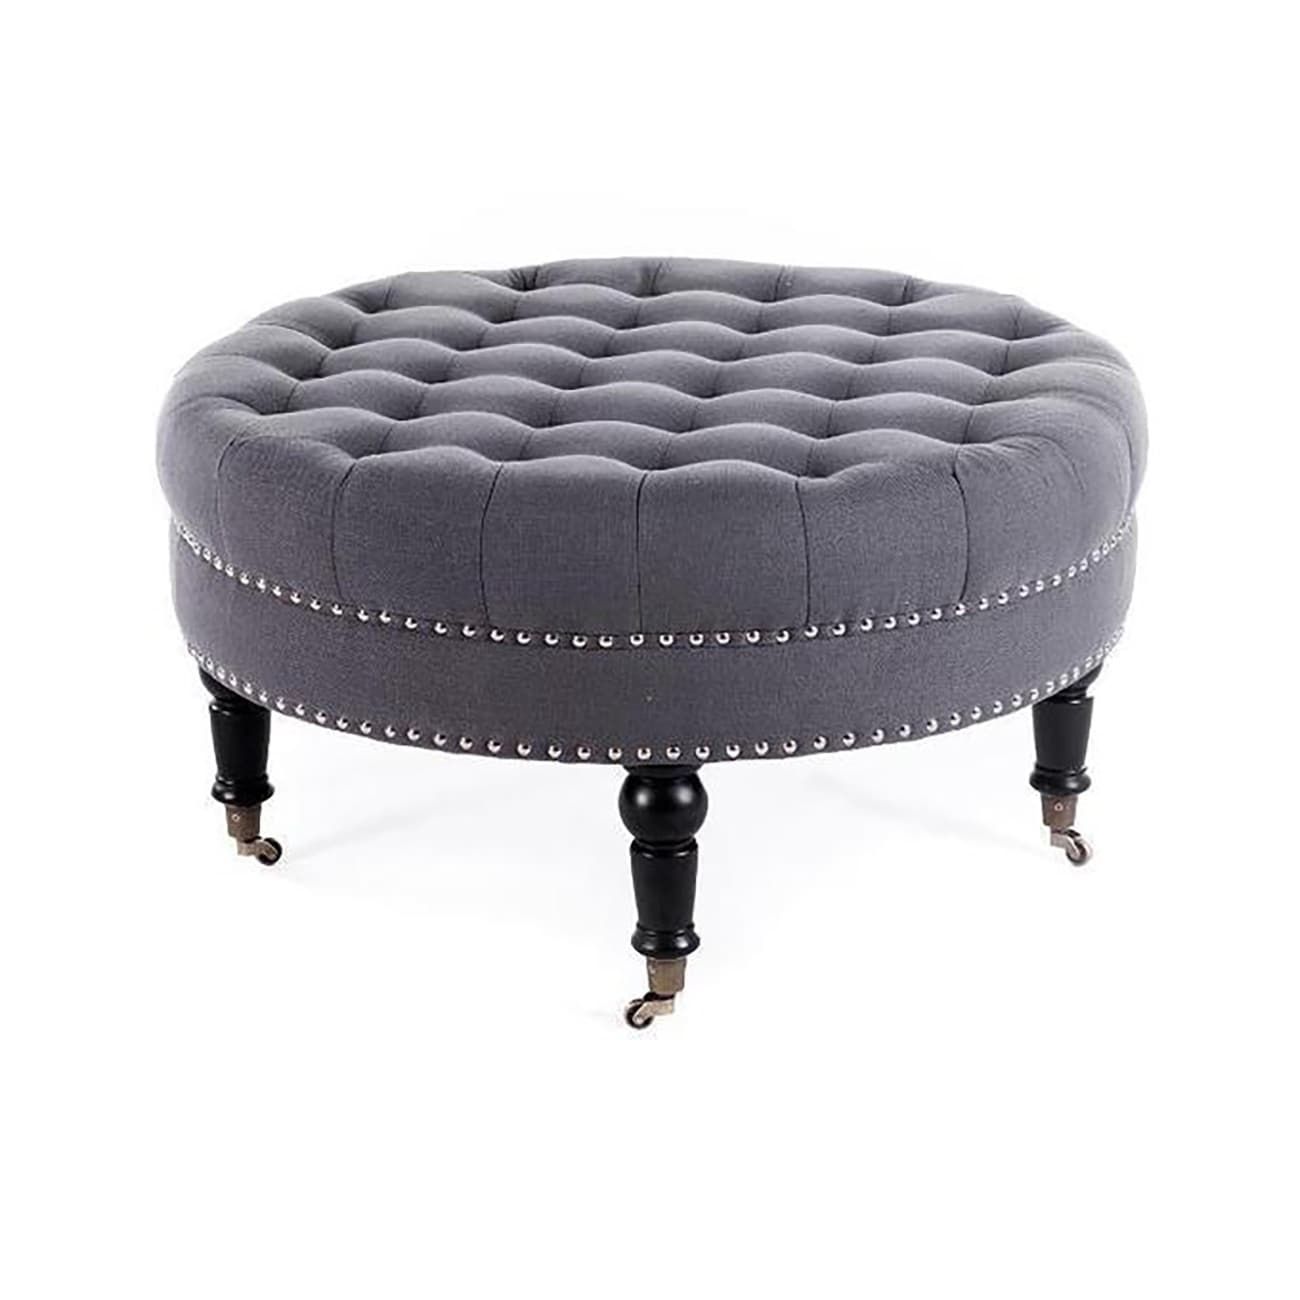 Shop Belleze Round Button Tufted Ottoman Nailhead Trim W/ Caster With Round Button Tufted Coffee Tables (View 28 of 30)